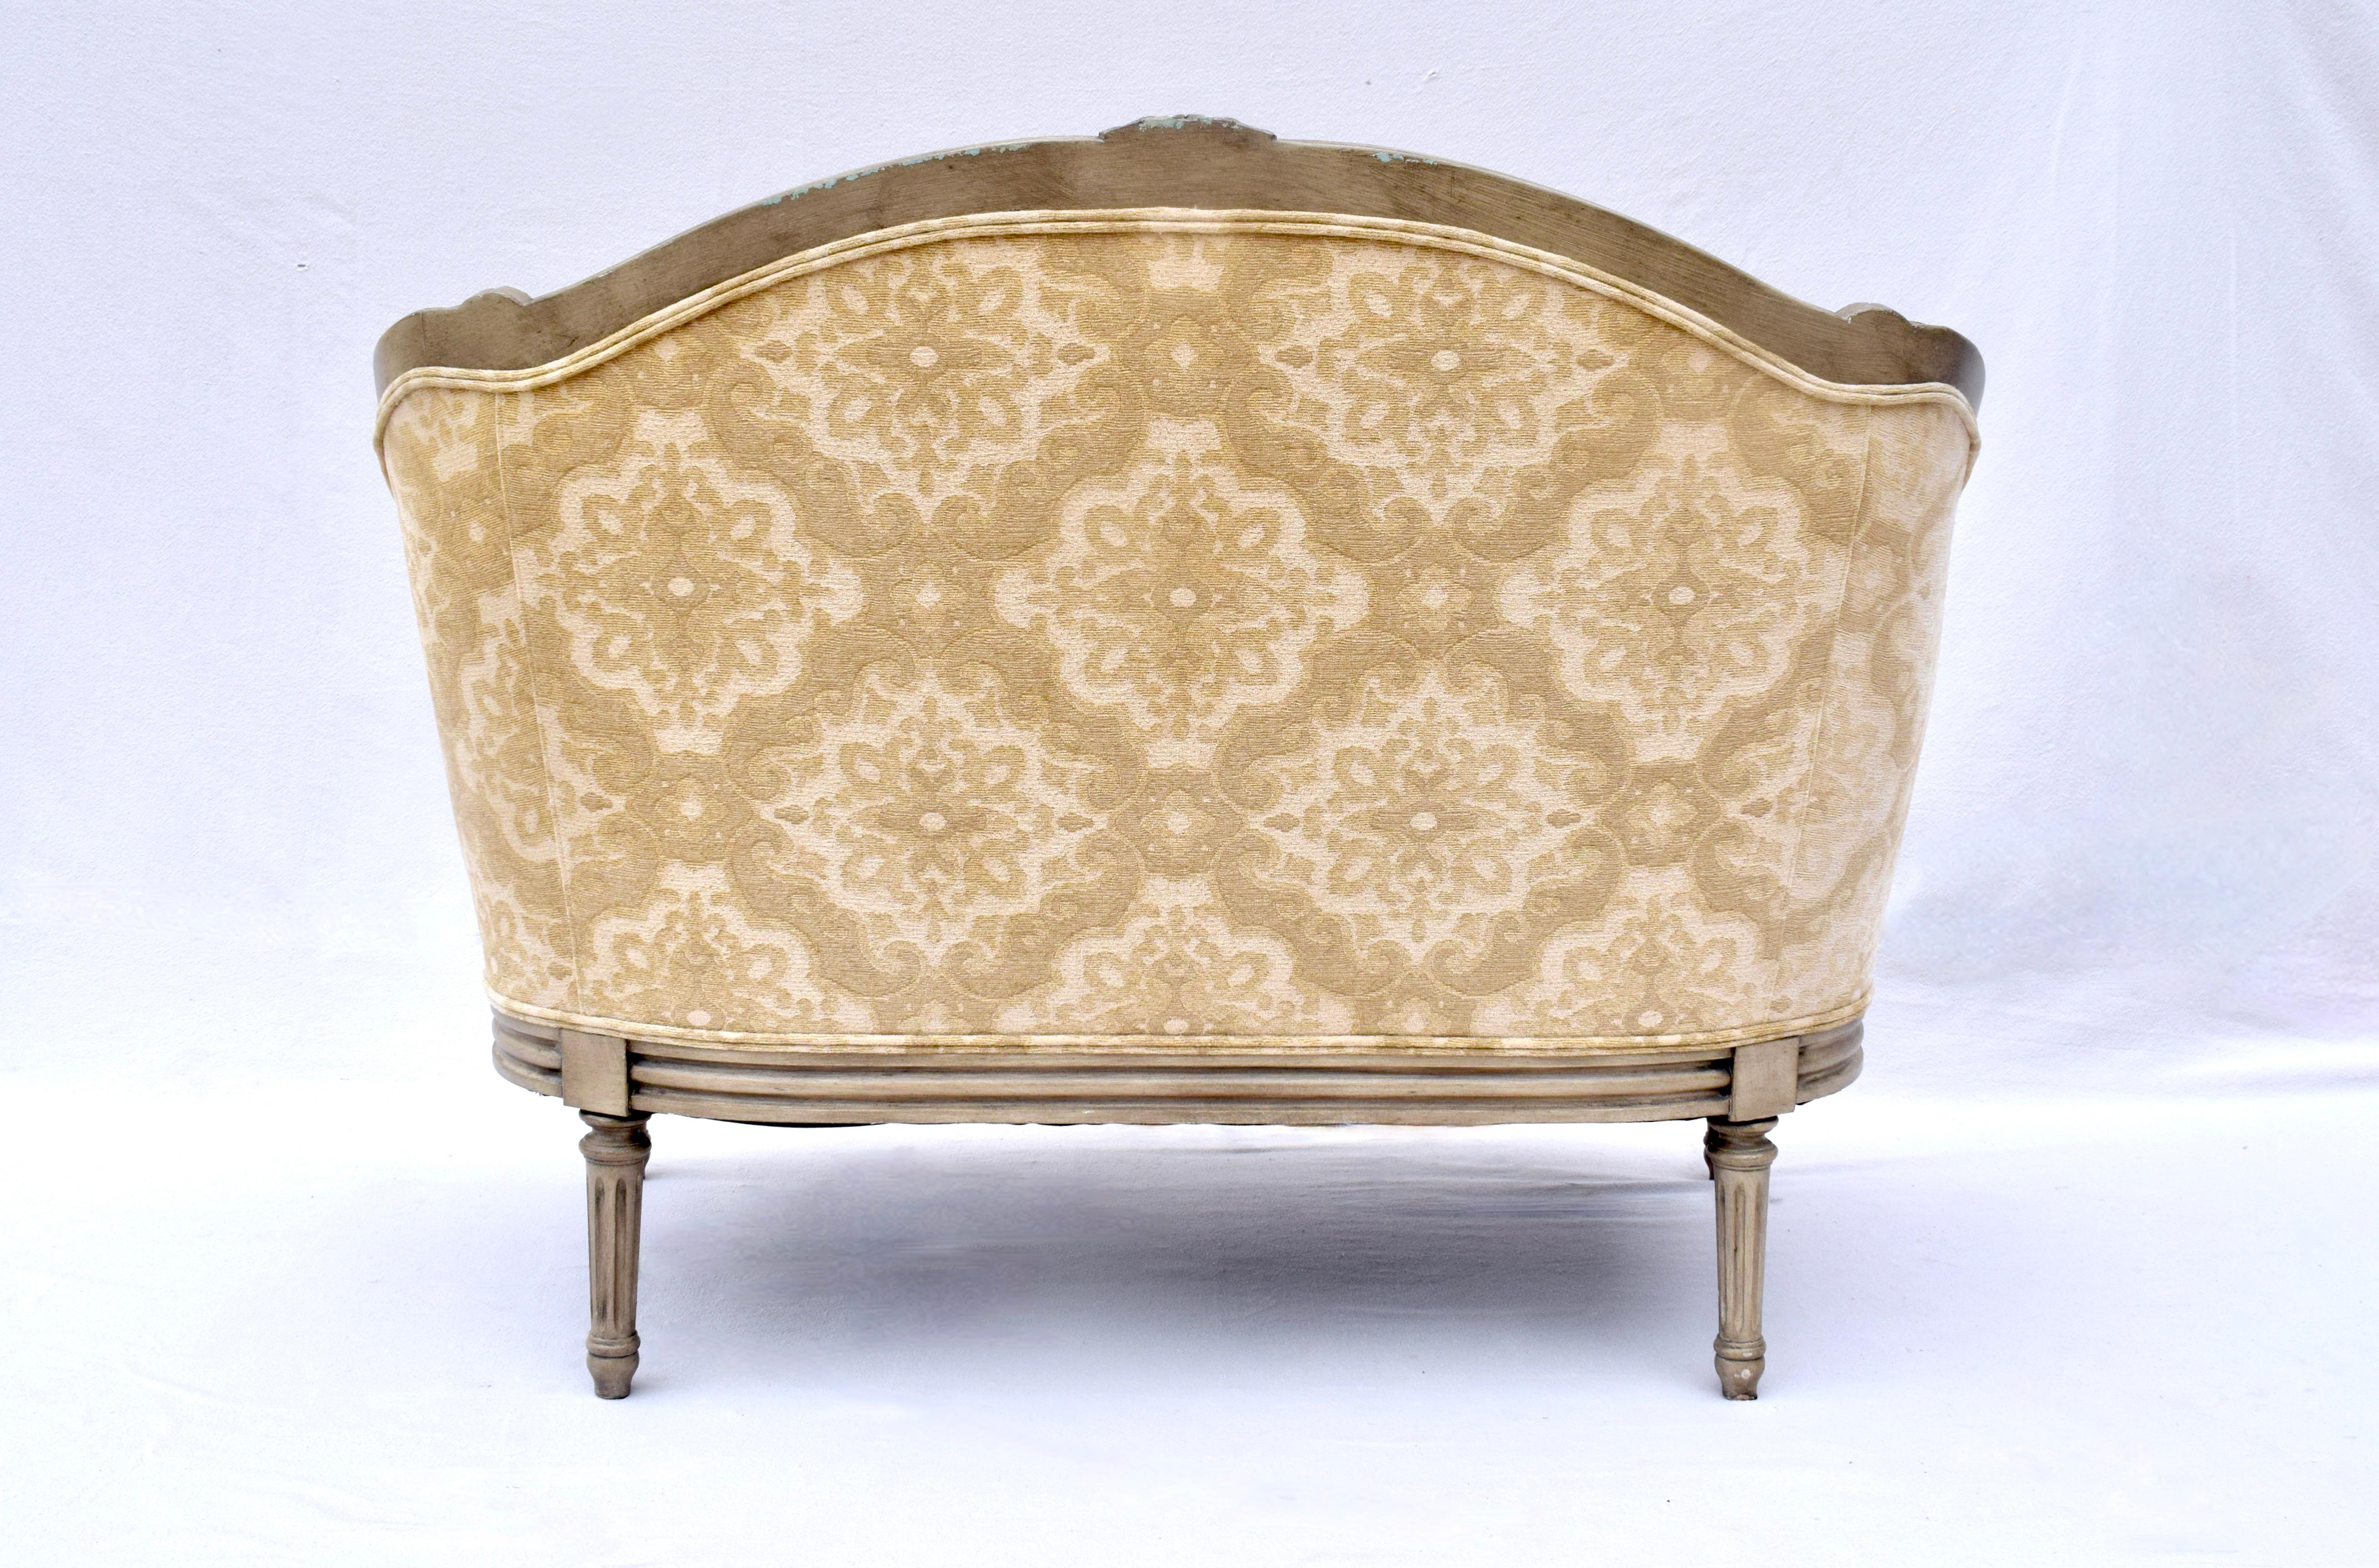 Chenille French Louis XvI Style Marquise Chair & Ottoman For Sale